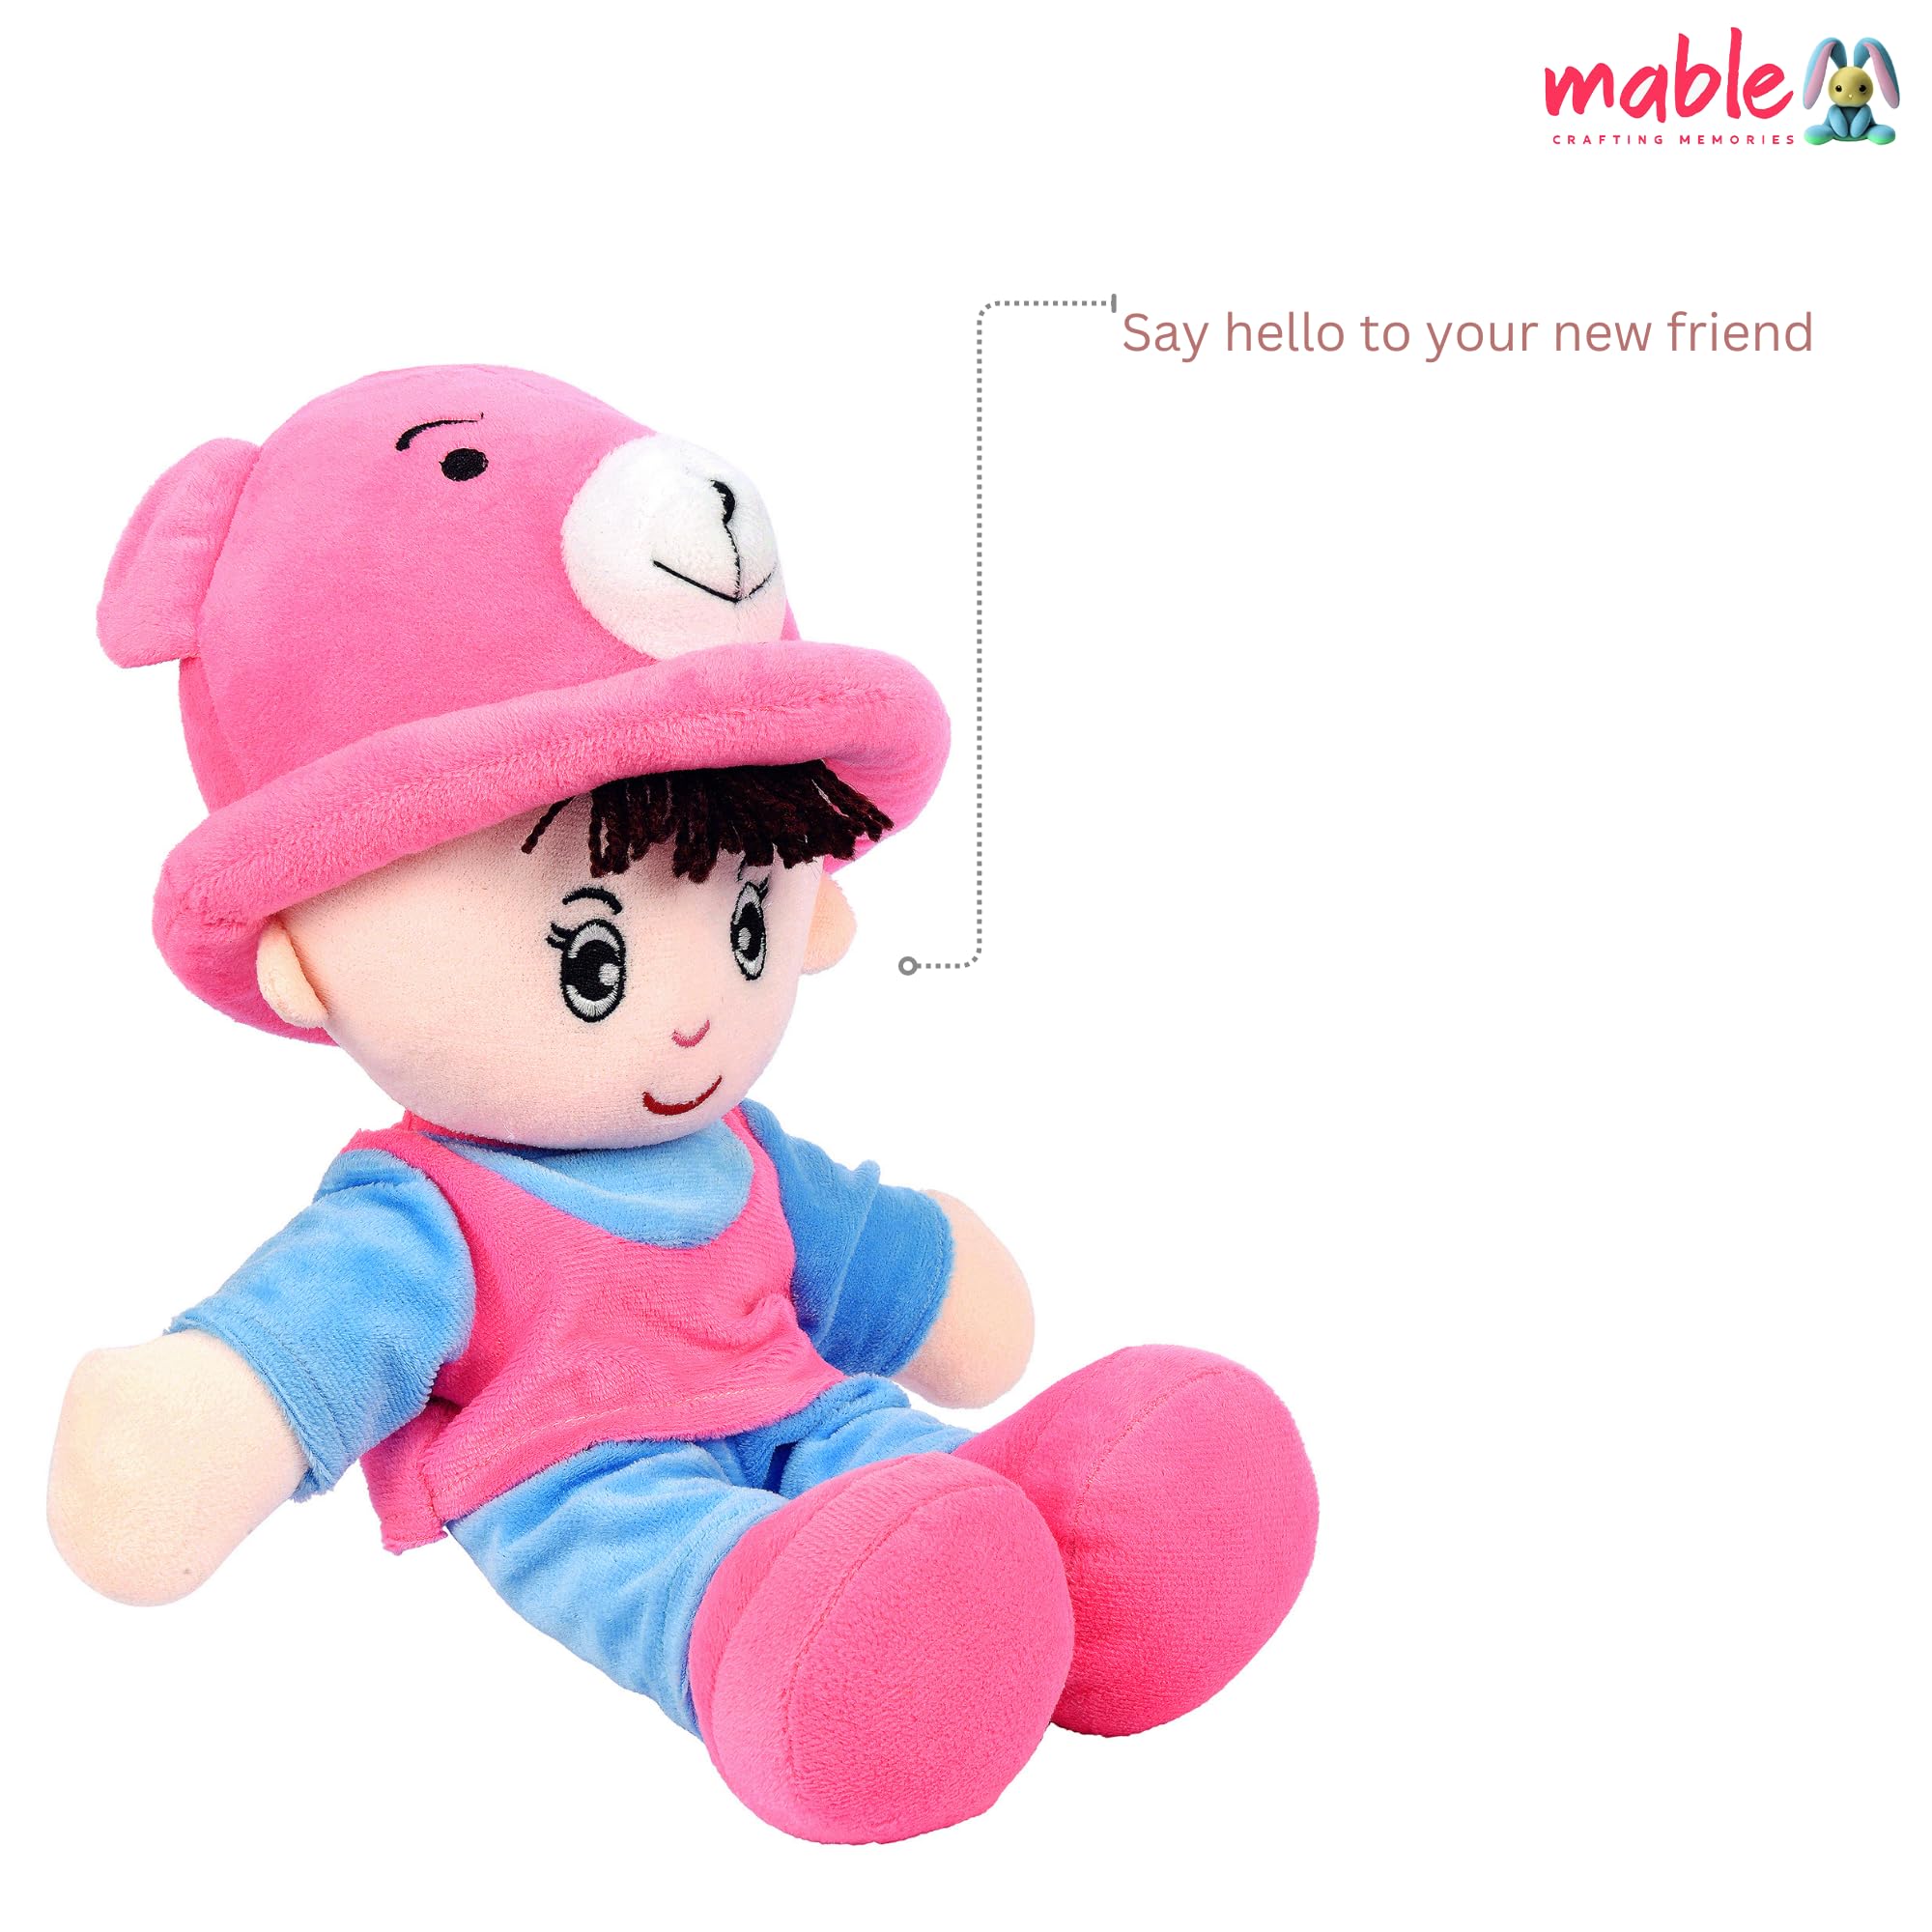 Addie Boy Rag Doll for Kids Huggable & Adorable Plush for Toddlers | Baby Doll with Hat for Boys and Girls | Soft and Cuddly Stuffed Toy for Babies | Made in India (Rani, 35cm)